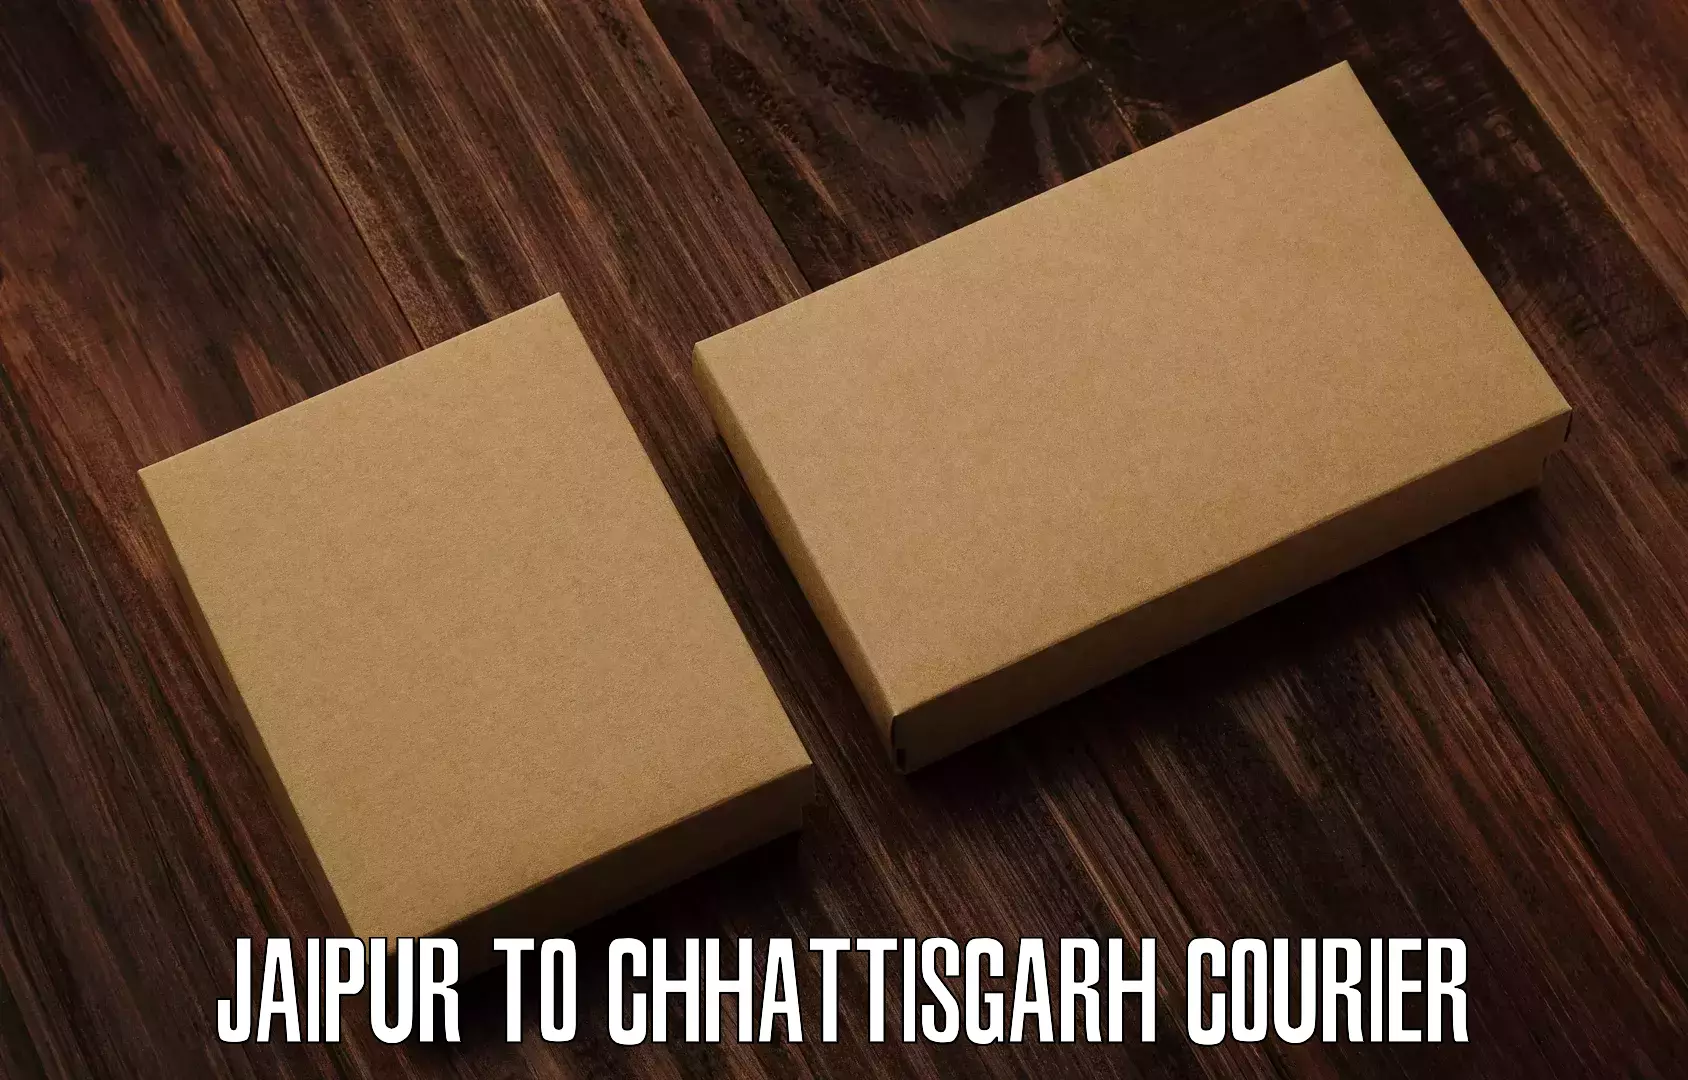 Package delivery network Jaipur to Abhanpur